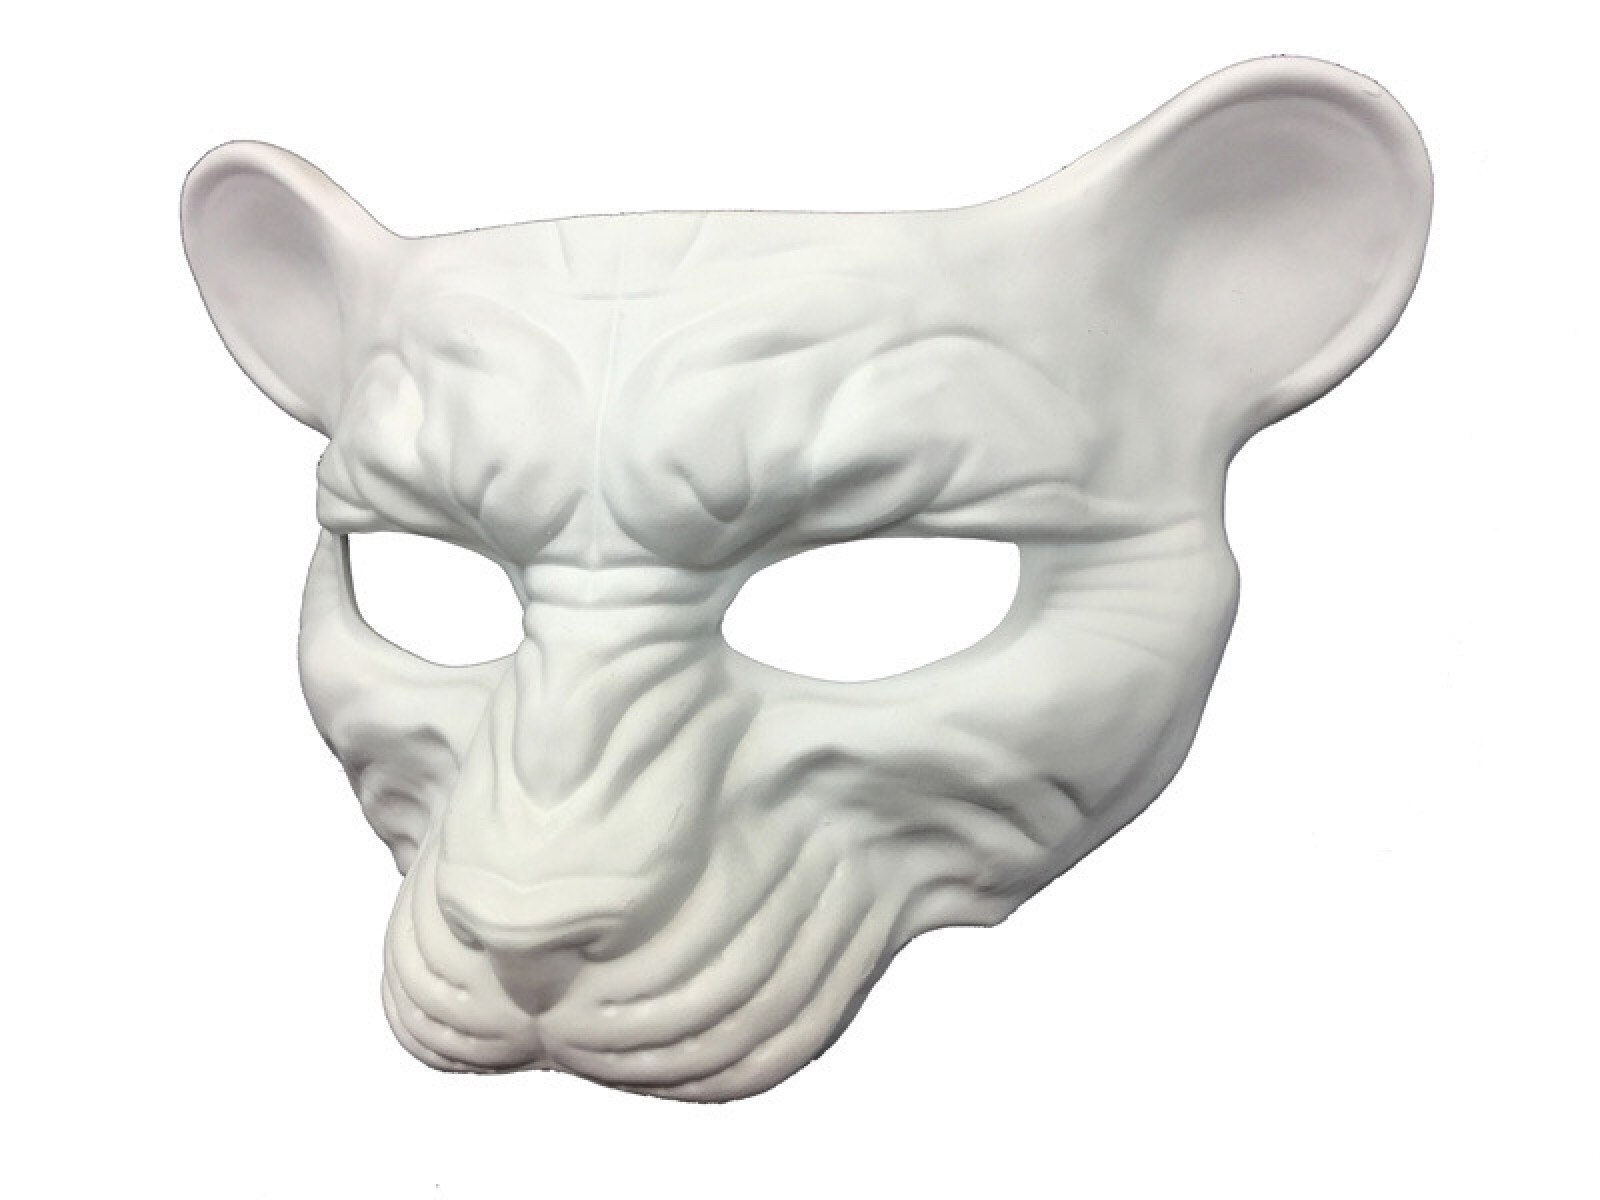  Toyvian Therian Mask Cat Masks Fox Mask Set White Paper Mask  Hand Painted Blank Mask Diy Your Own Mask Cosplay Fox and Cat Animal Mask  DIY Blank Masks Masquerade Accessories 